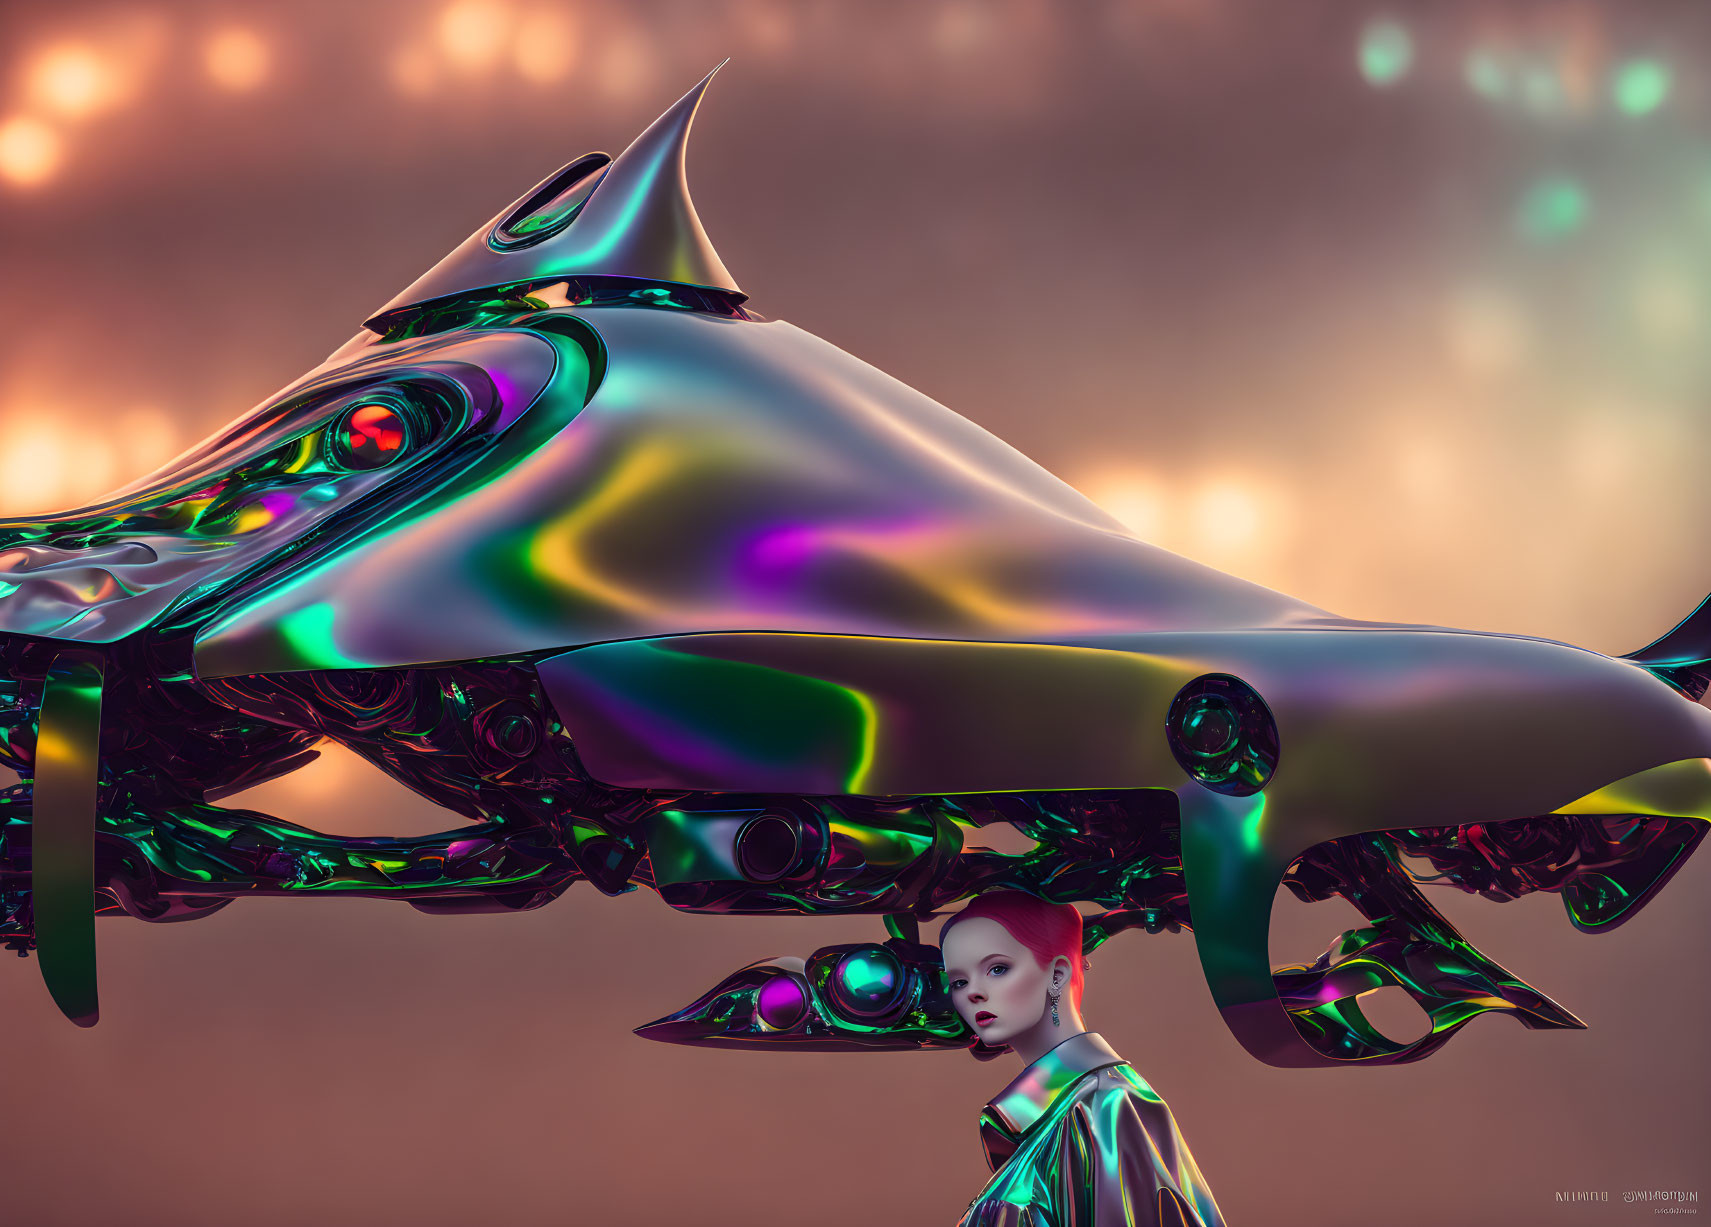 Futuristic iridescent vehicle and humanoid figure in matching aesthetics against amber sky